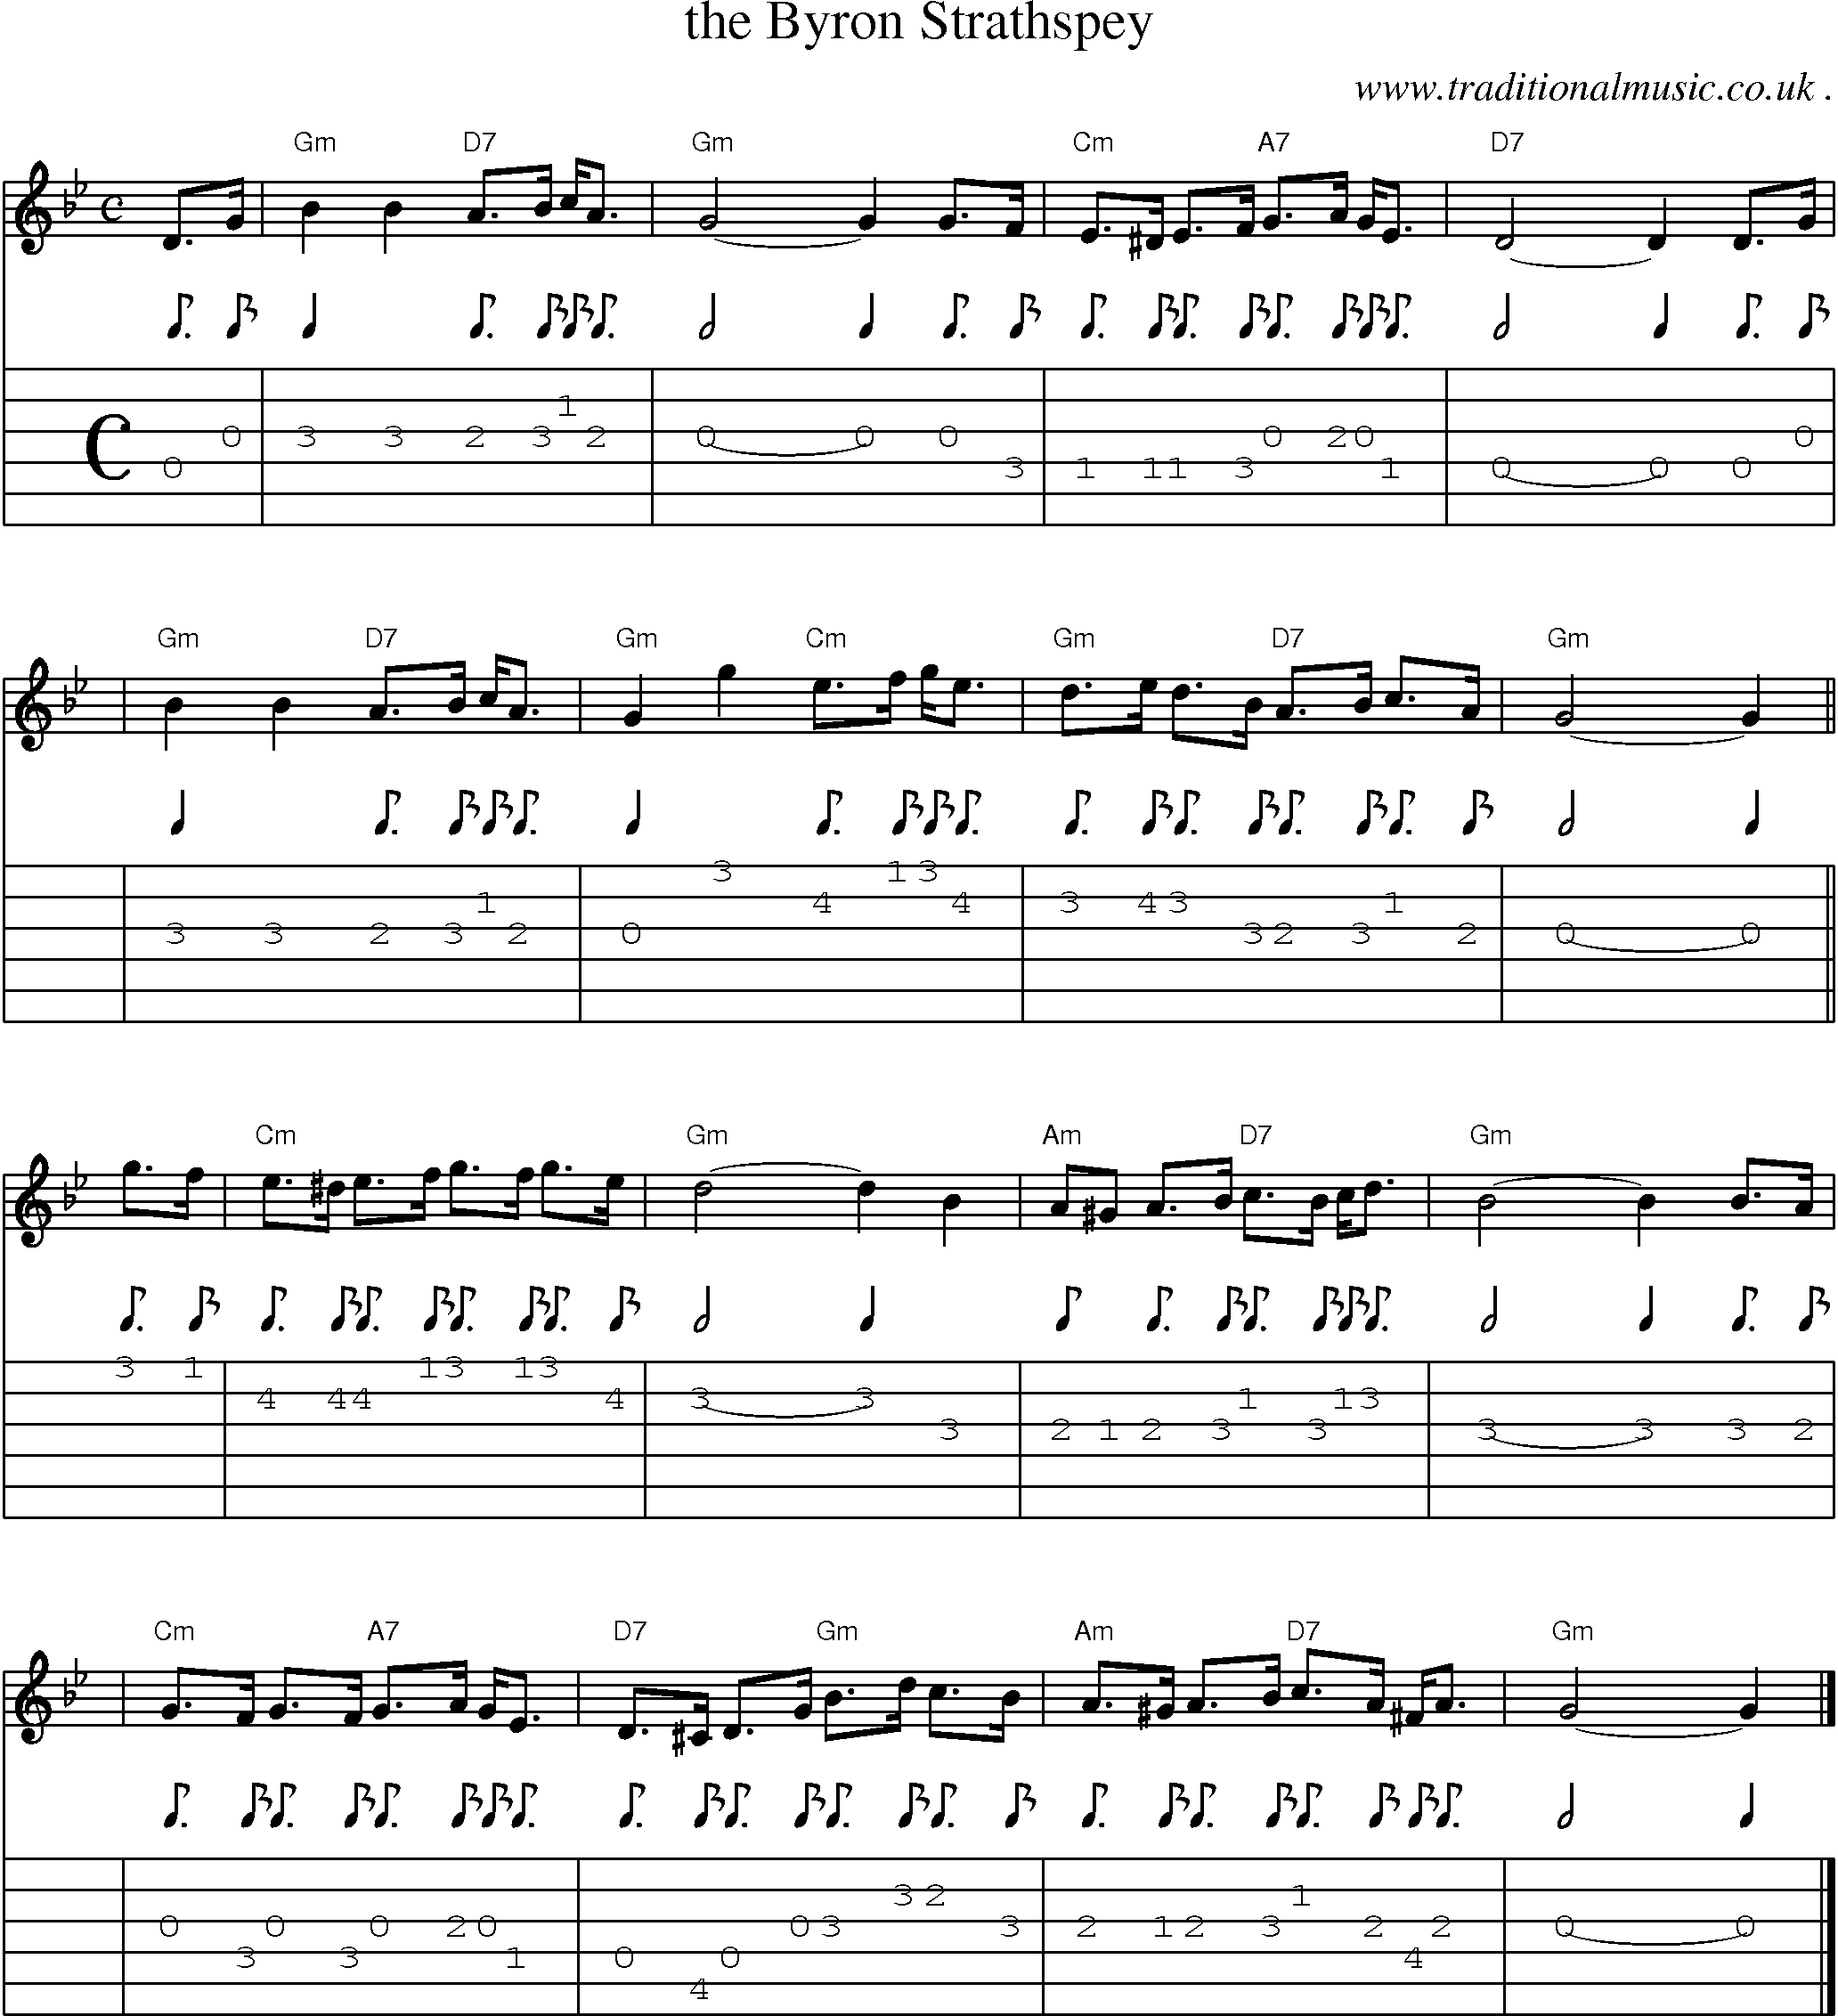 Sheet-music  score, Chords and Guitar Tabs for The Byron Strathspey